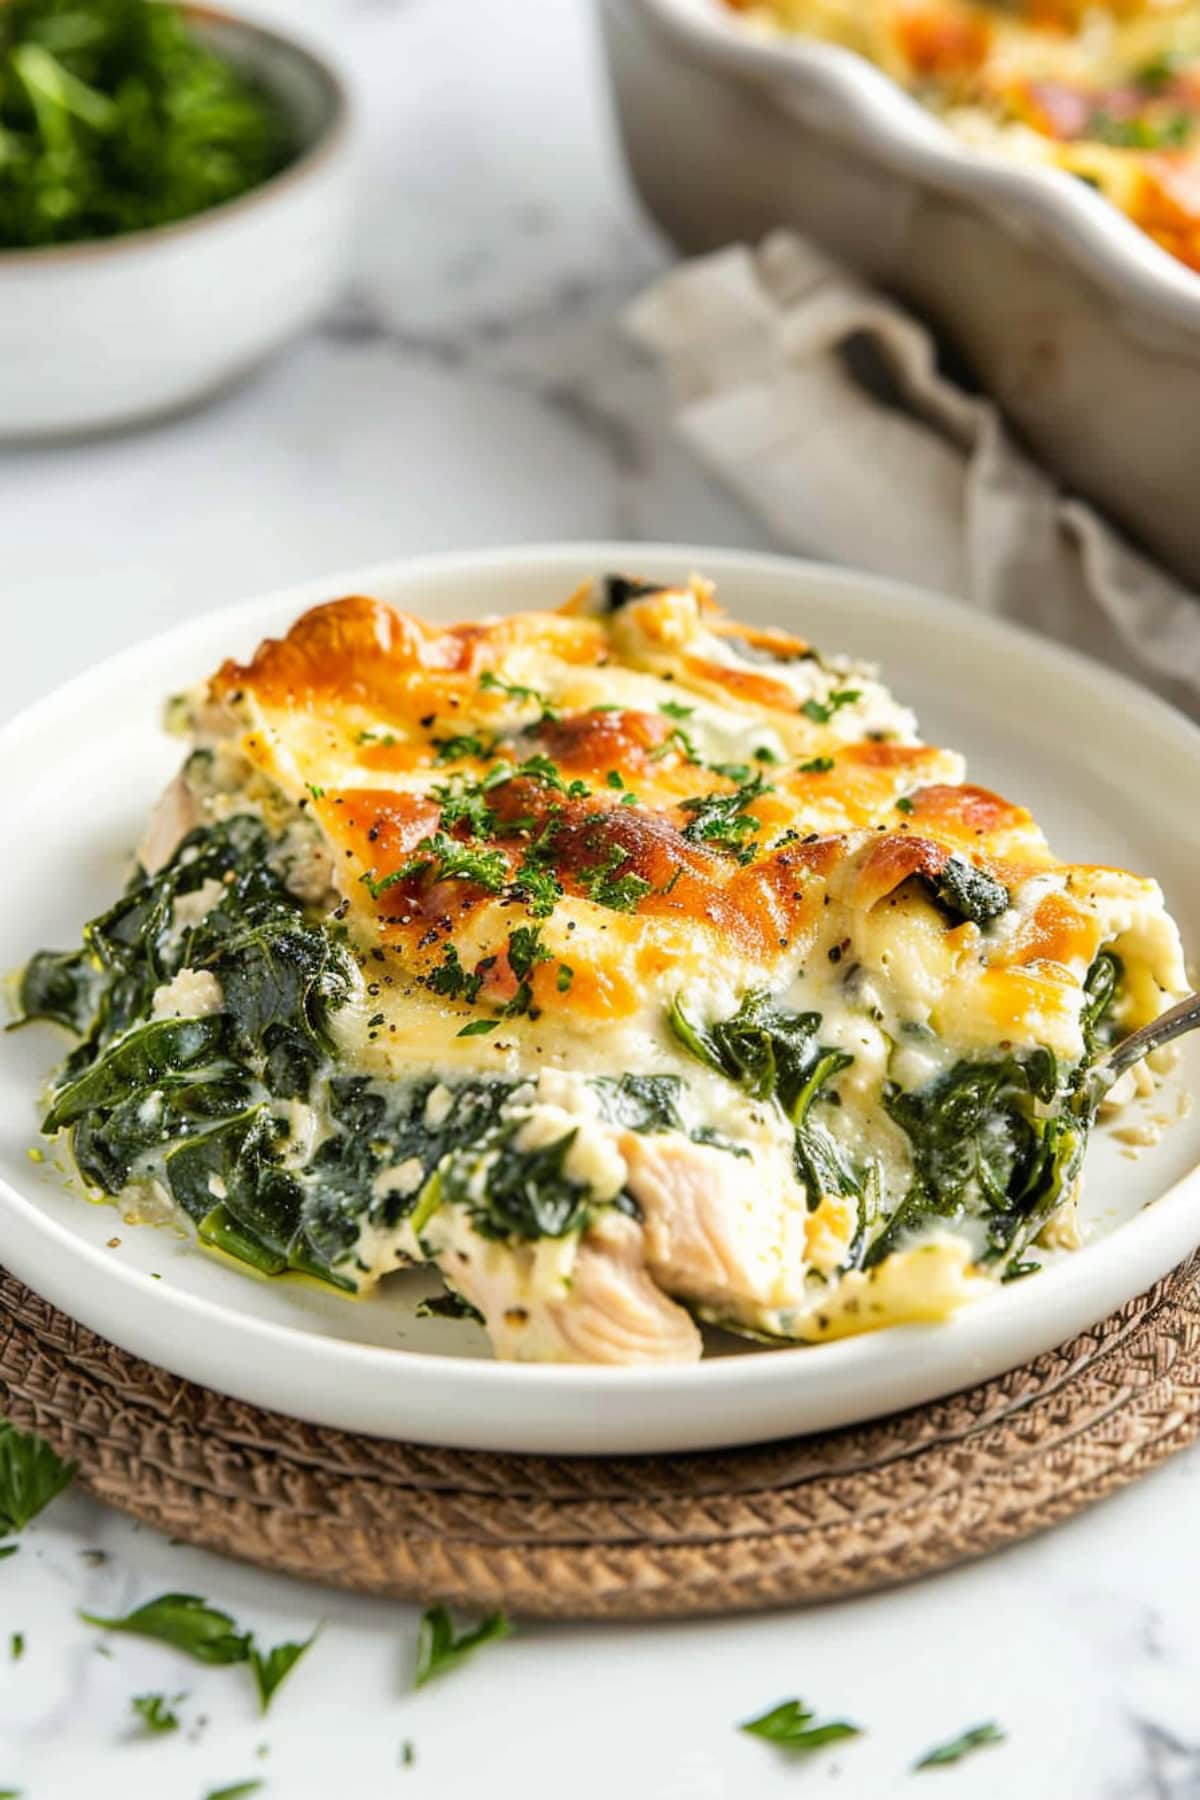 Chicken and spinach casserole in a white plate.